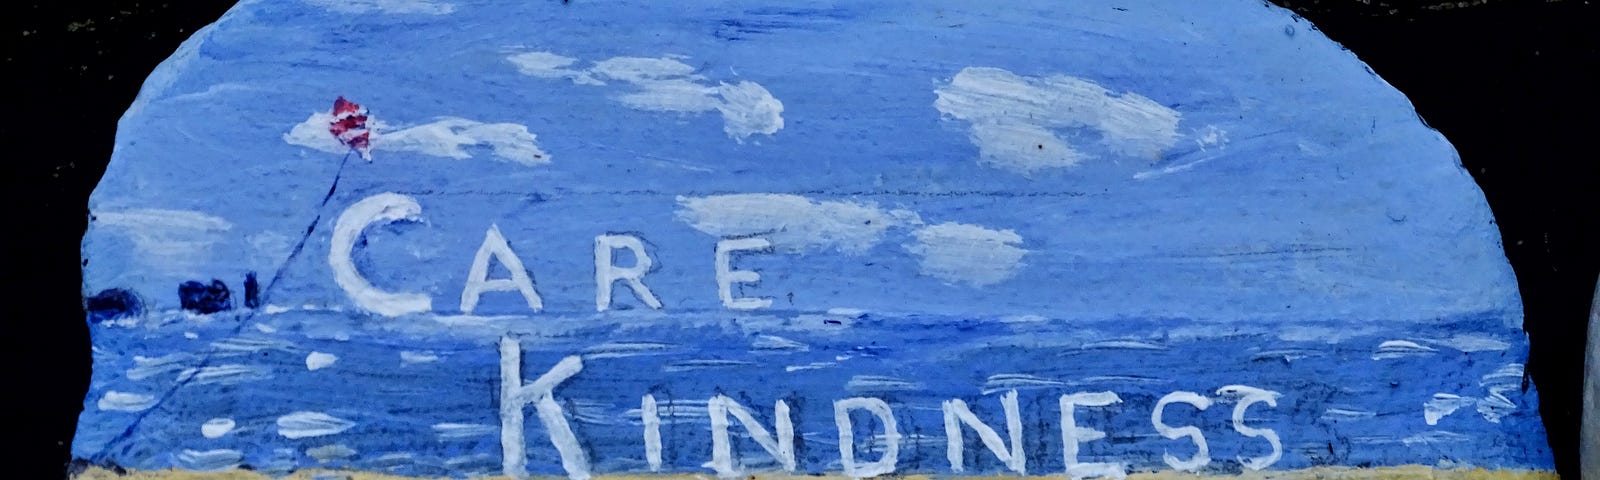 care, kindness, consider painted on a rock